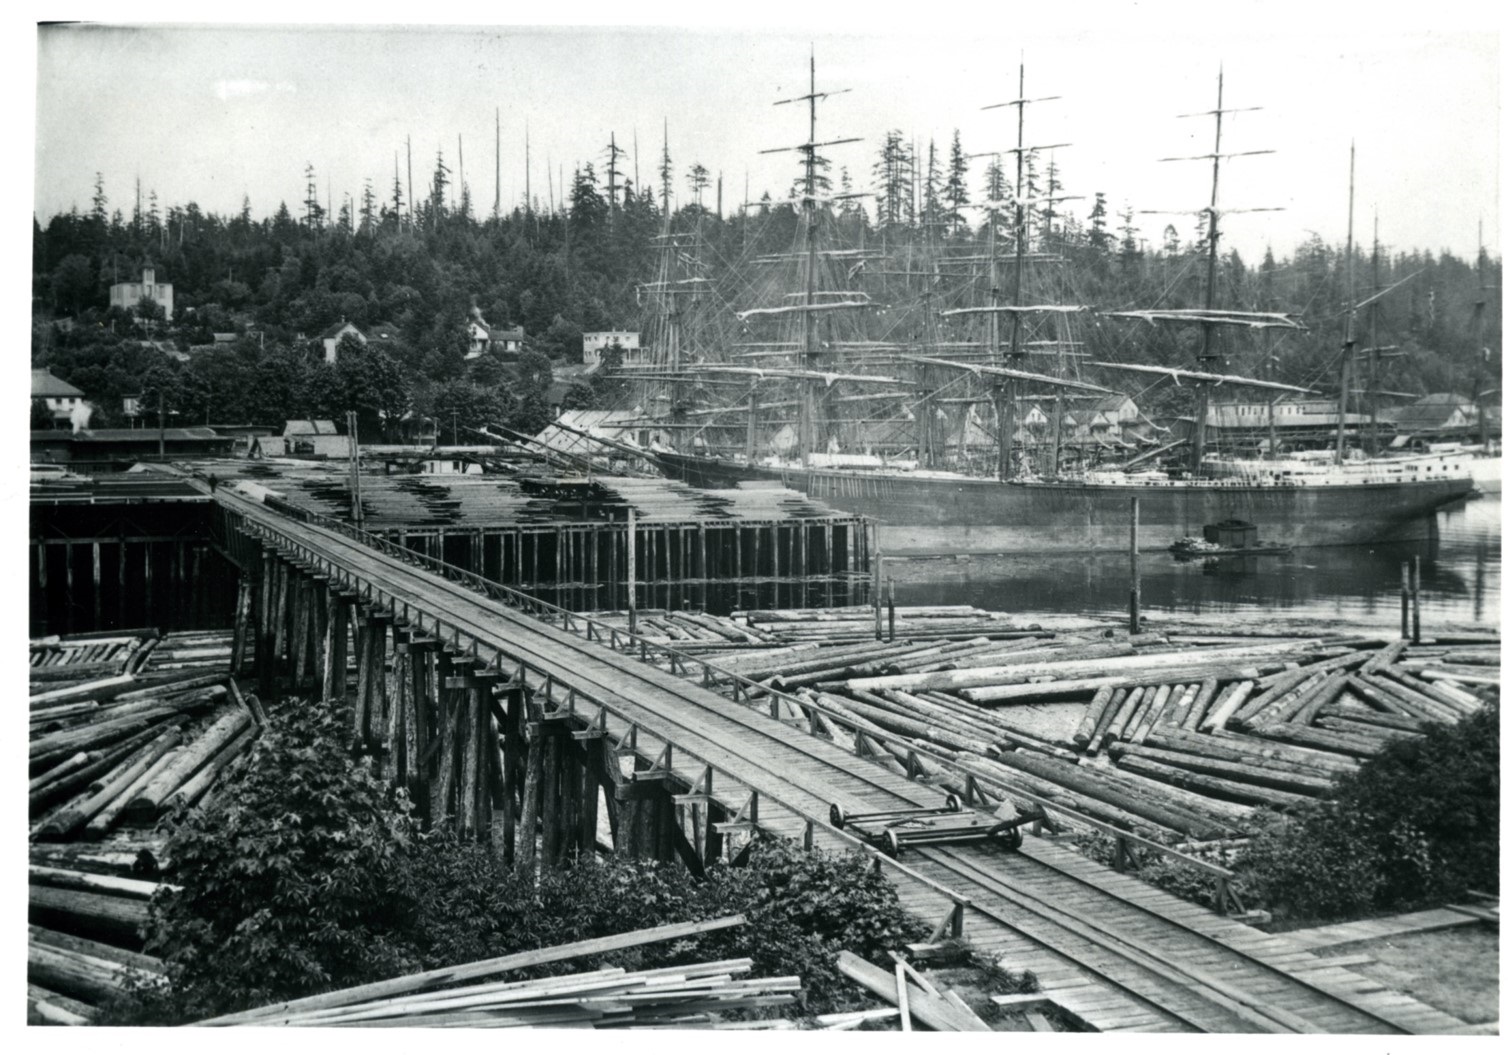 A black and white image of a port with a train trestle over the water, logs in the water on either side, and a large three-masted boat. 